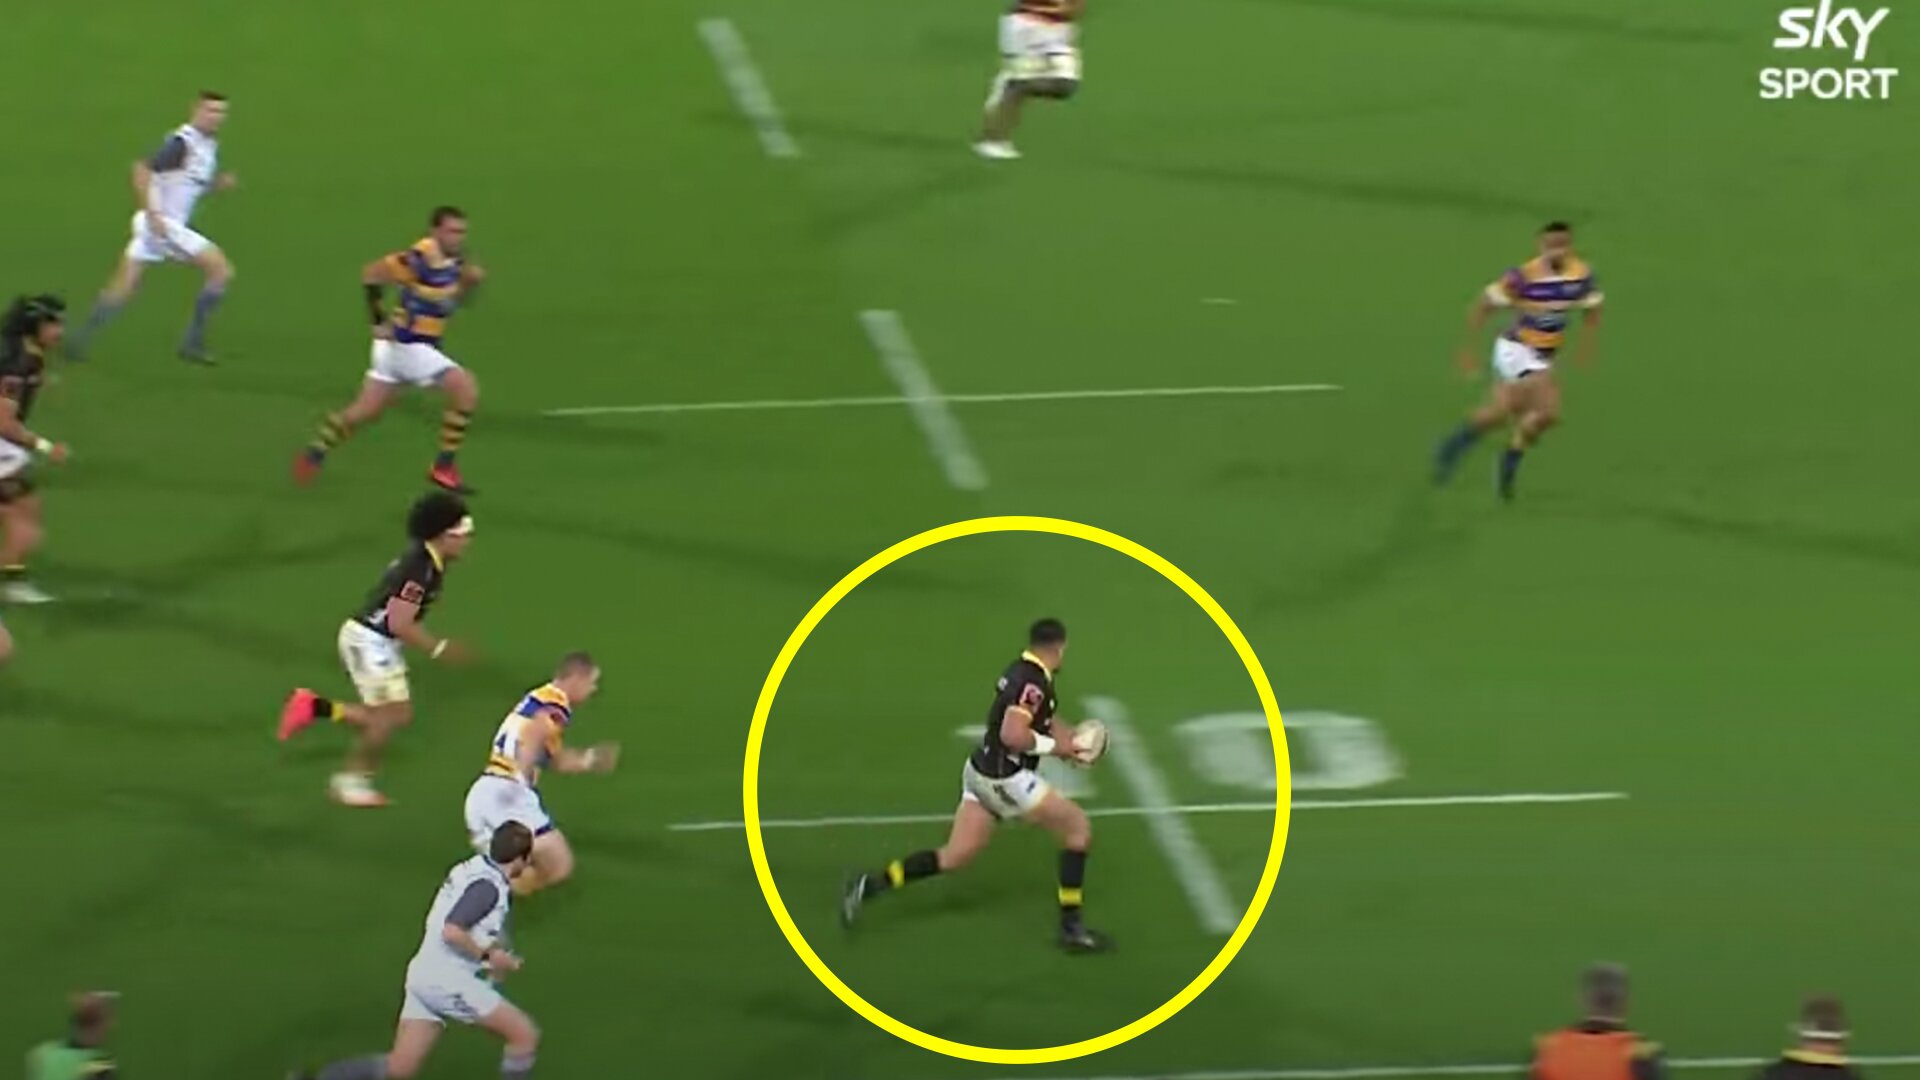 Fans amazed as front row forward goes on 50m rampage through entire opposition team